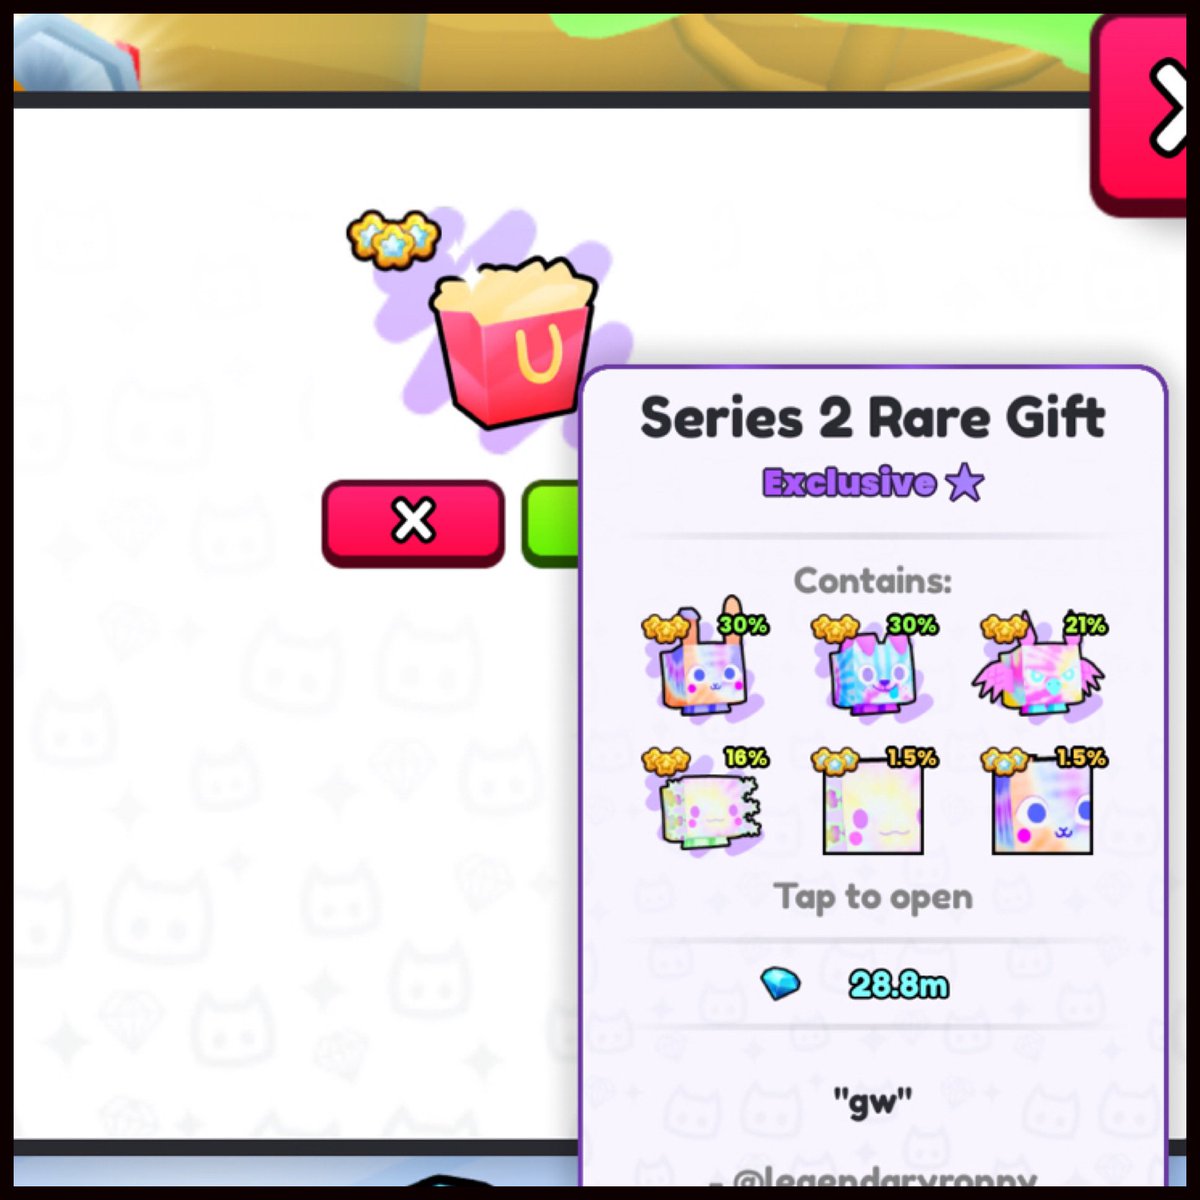 ✨Weeknd give-away time✨

Ty to my friend @KyCodesRB for sponsoring 💜

Giving away a series 2 rare gift 🎁 to 1x winner 

To enter:
✨like & share
💜 follow me & @KyCodesRB 

Ends Monday 05/13- gl 🍀🍀